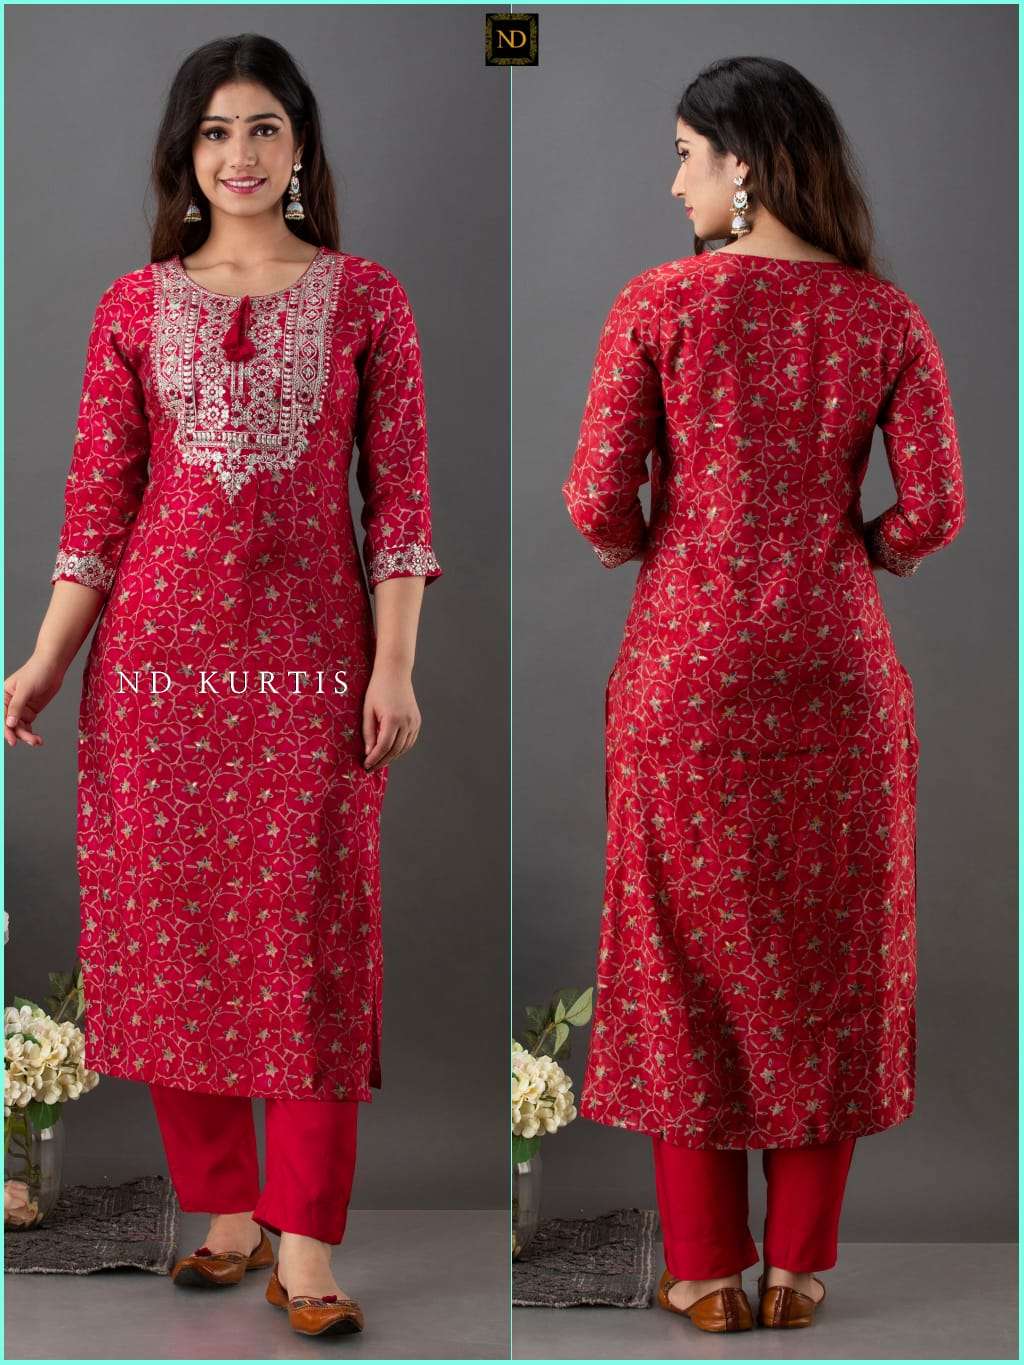 balaji emporium presents dno 1541 red indian women traditional muslin straight kurti pant dupatta set for ethnic traditional festive party wear collection girls kk 0 2022 08 31 18 06 26